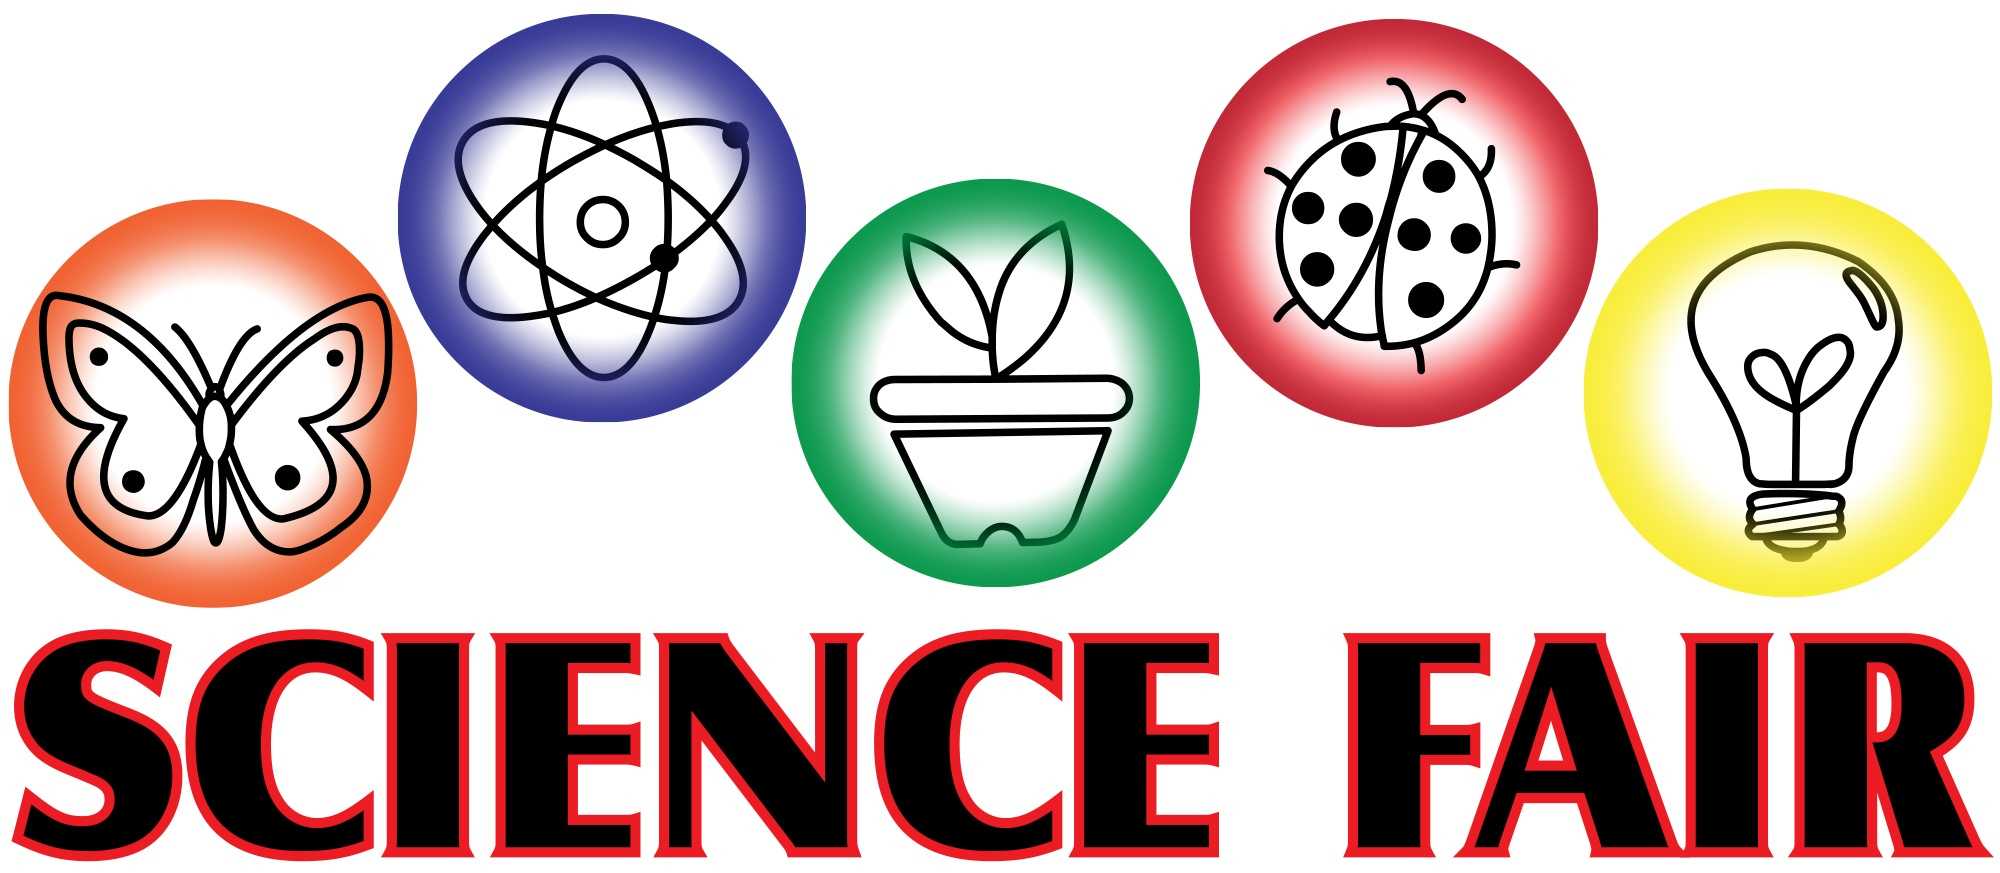 Science Fair With Science Fair Banner Template